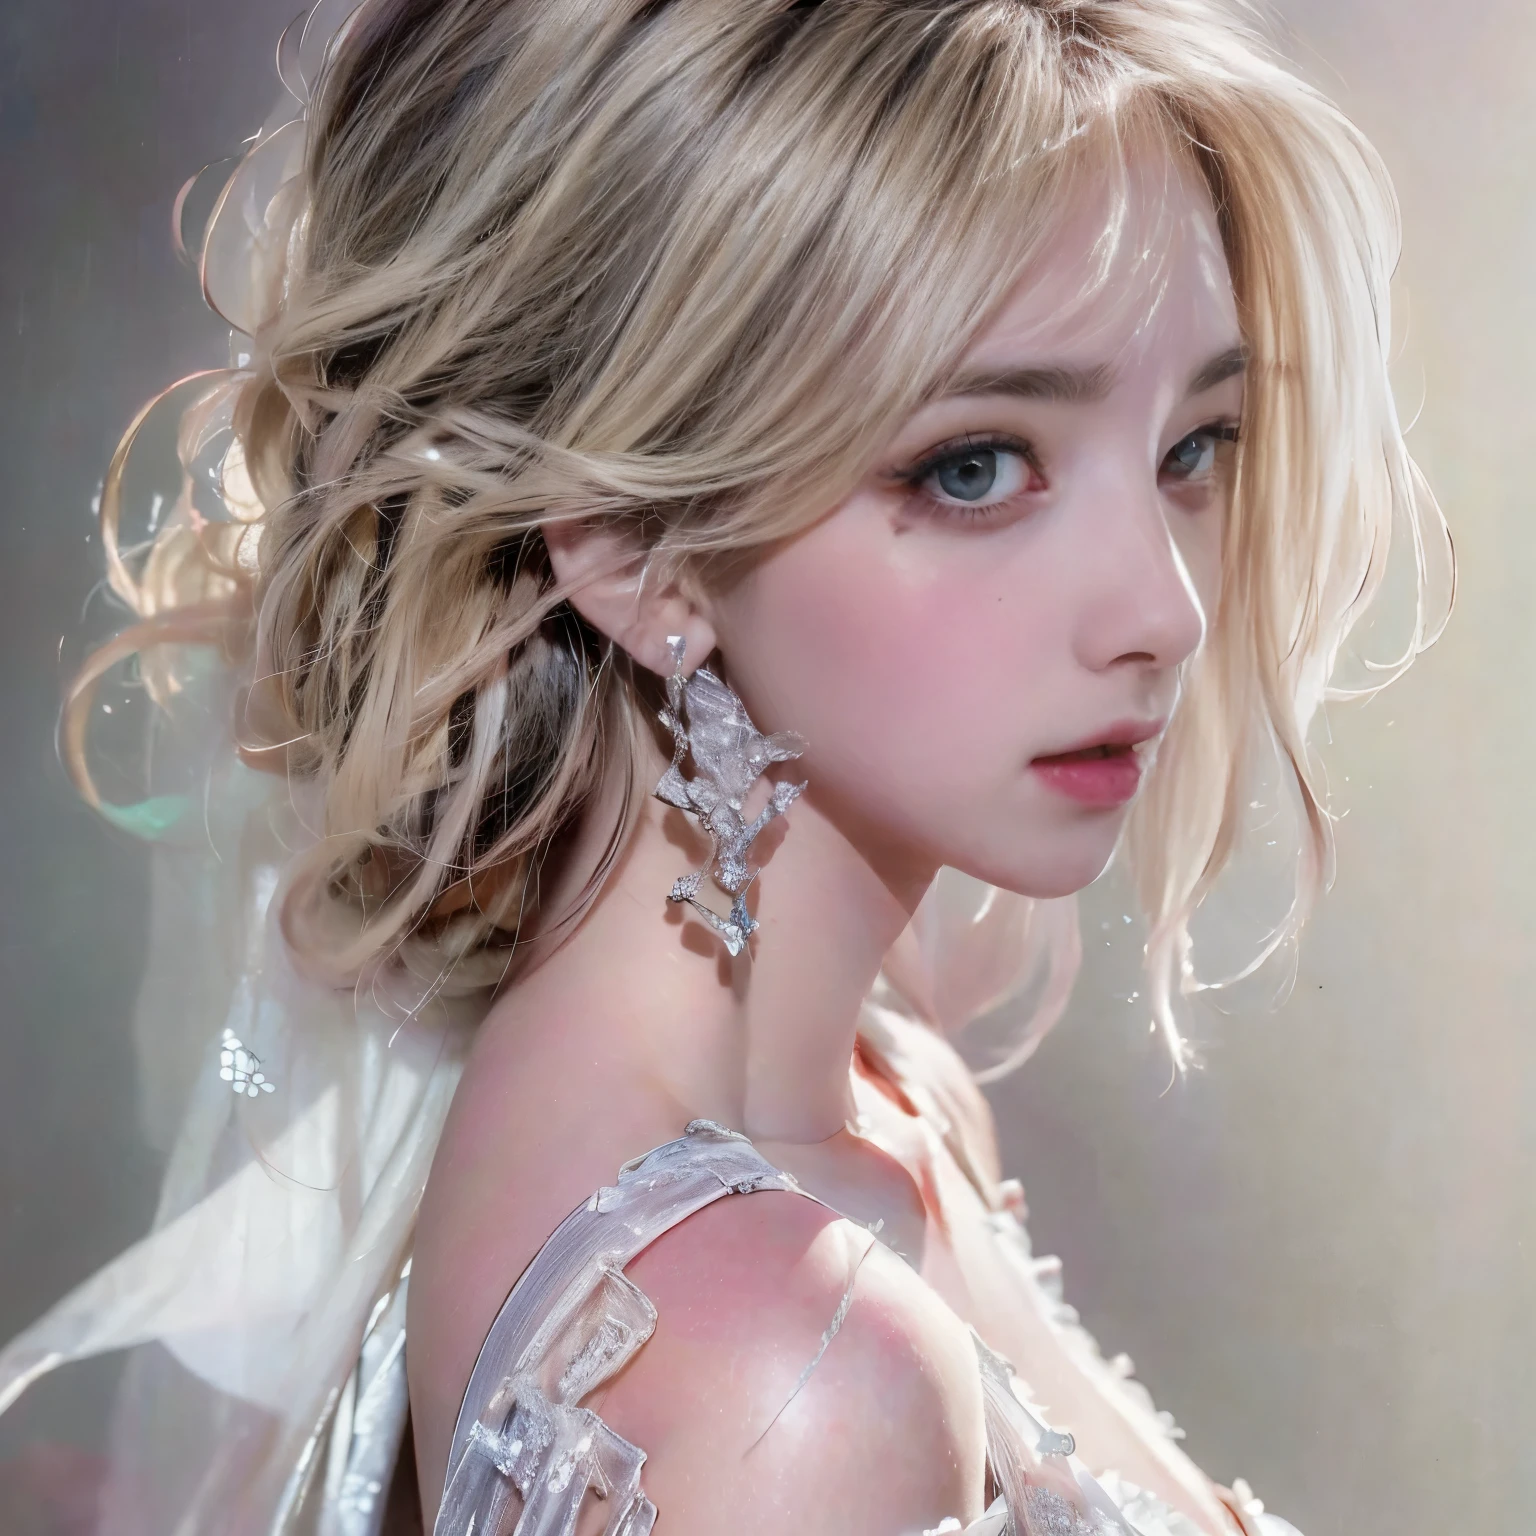 8K）、（Best image quality:1.5）、gray background、face close up、１girl、masterpiece、Delicate and sharp eyes、brown eyes、power of eyes、delicate face、cup、attractive face、platinum blonde hair、Half length wave、wedding dress、ピンクのwedding dress、I can see your collarbone、female、collarbone emphasis、earring、necklace、